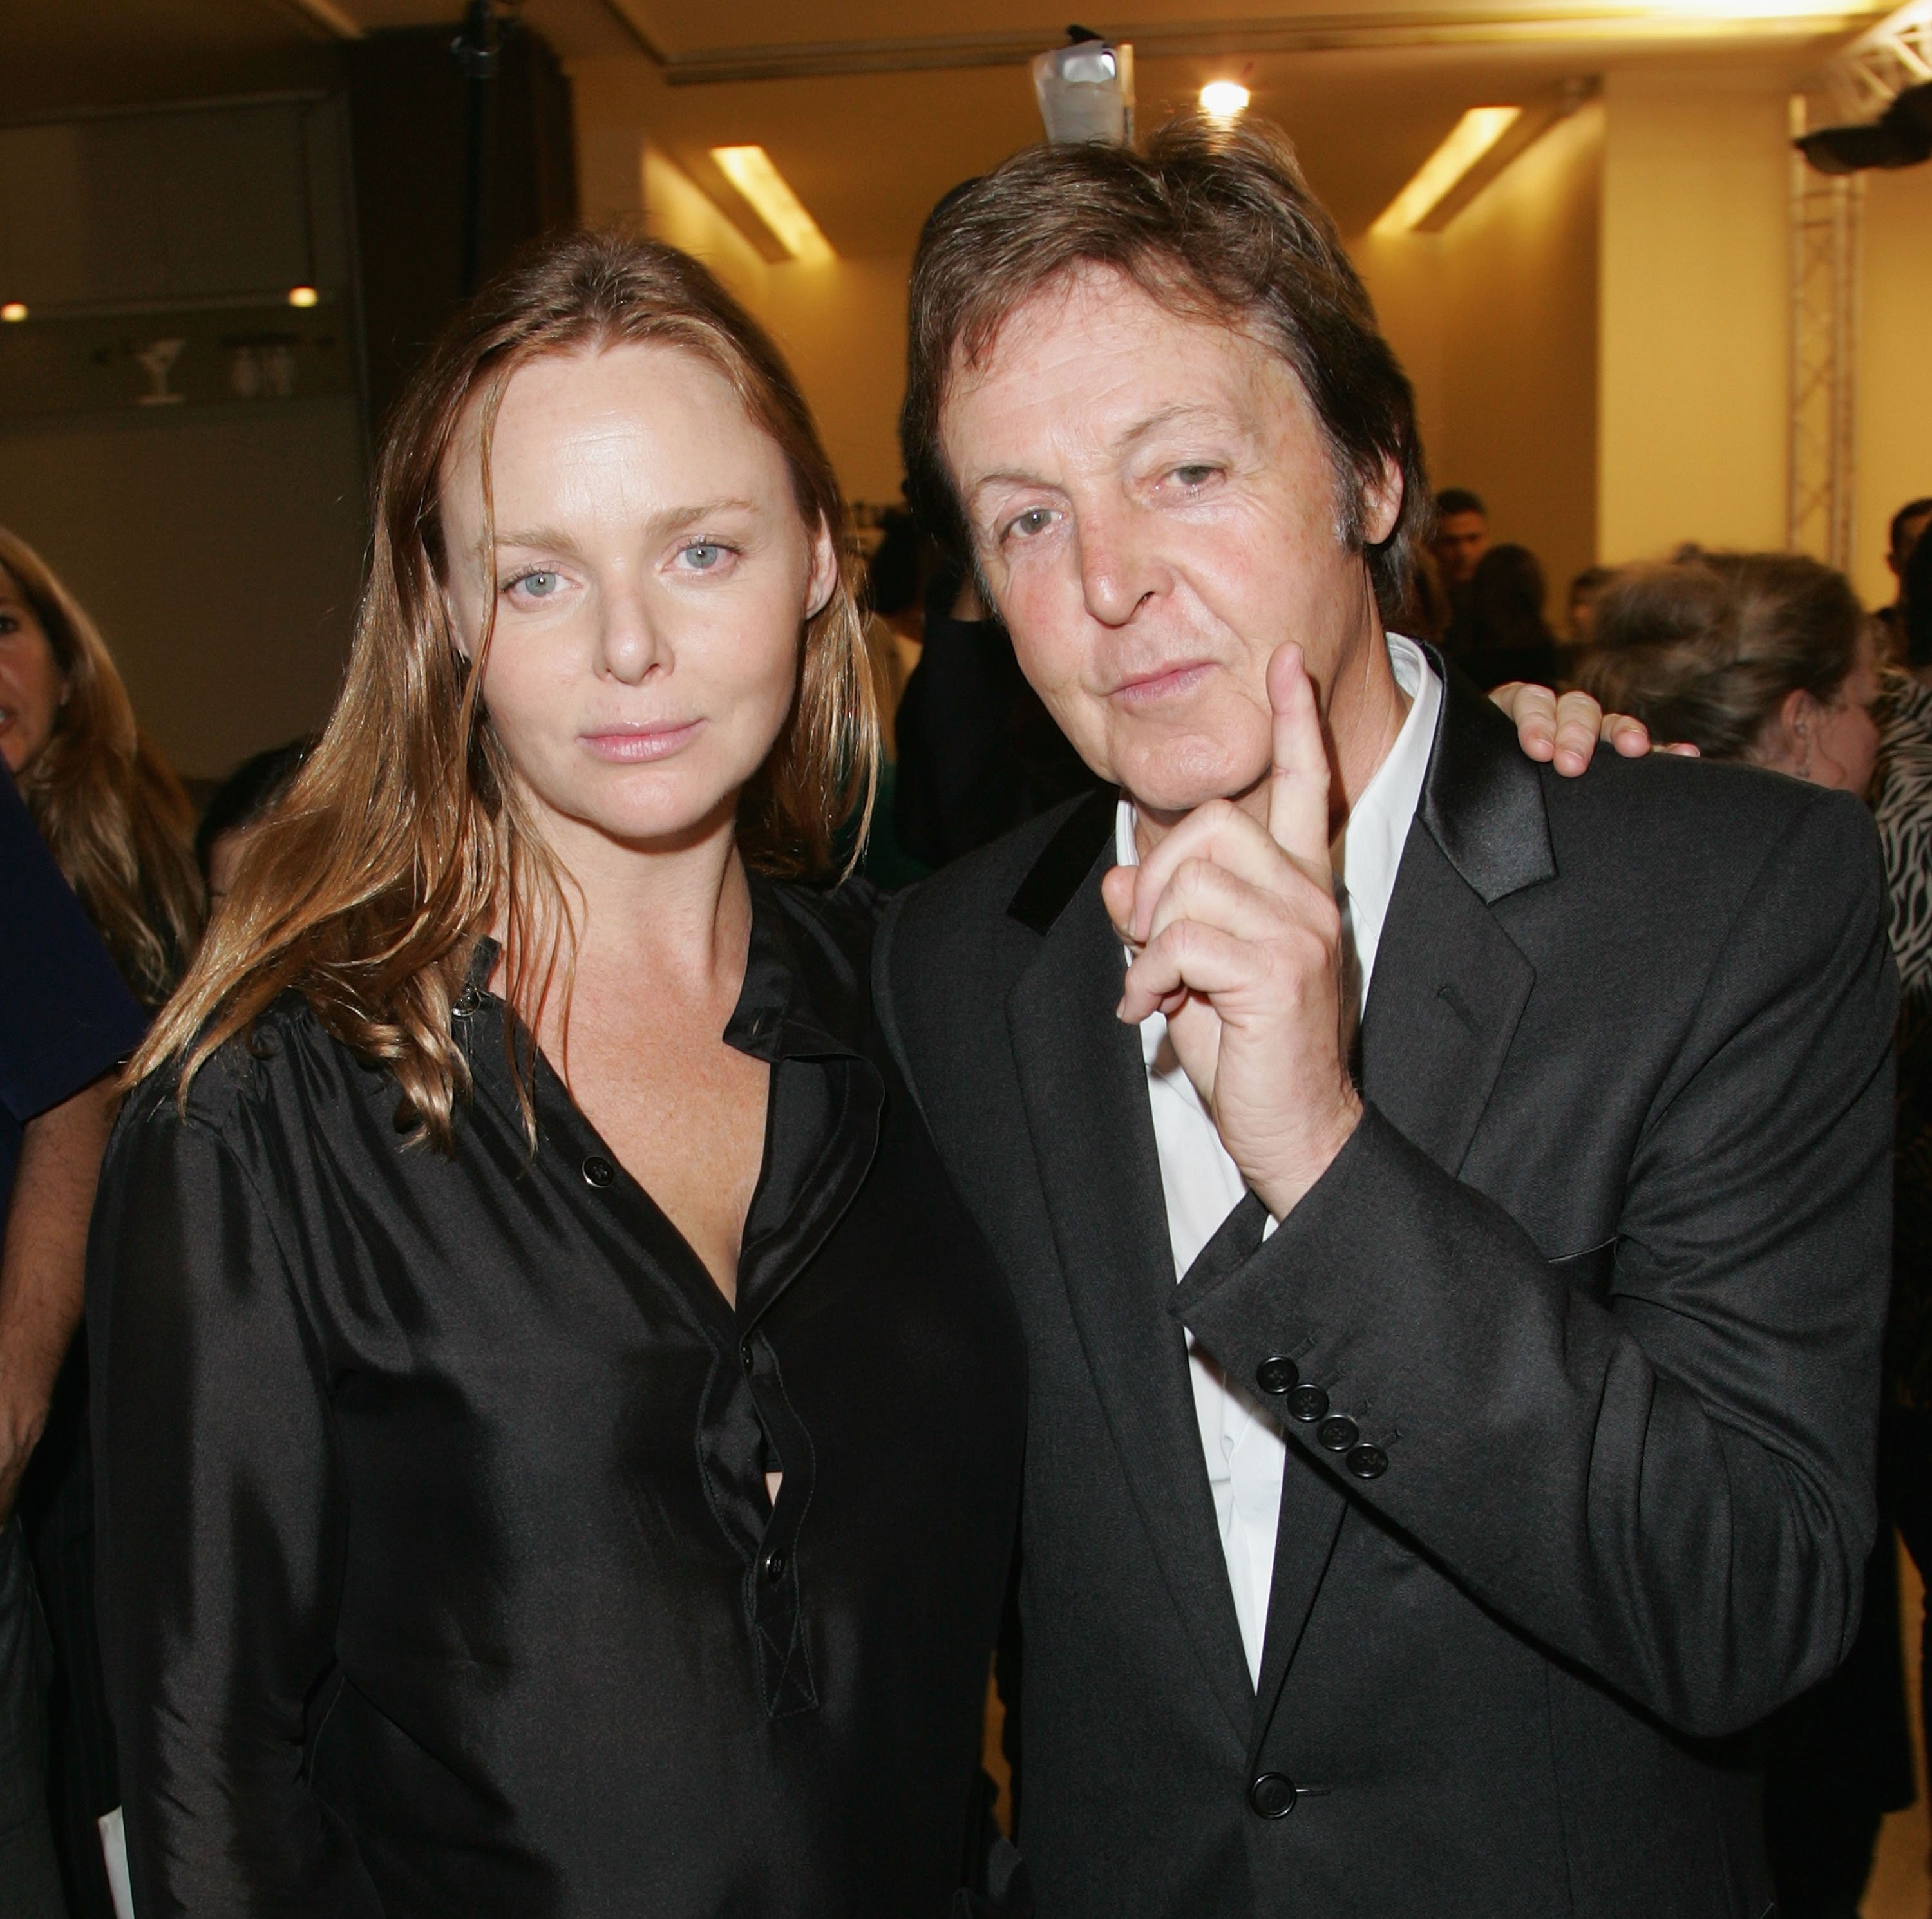 Stella McCartney returns home with her daughter after dropping her